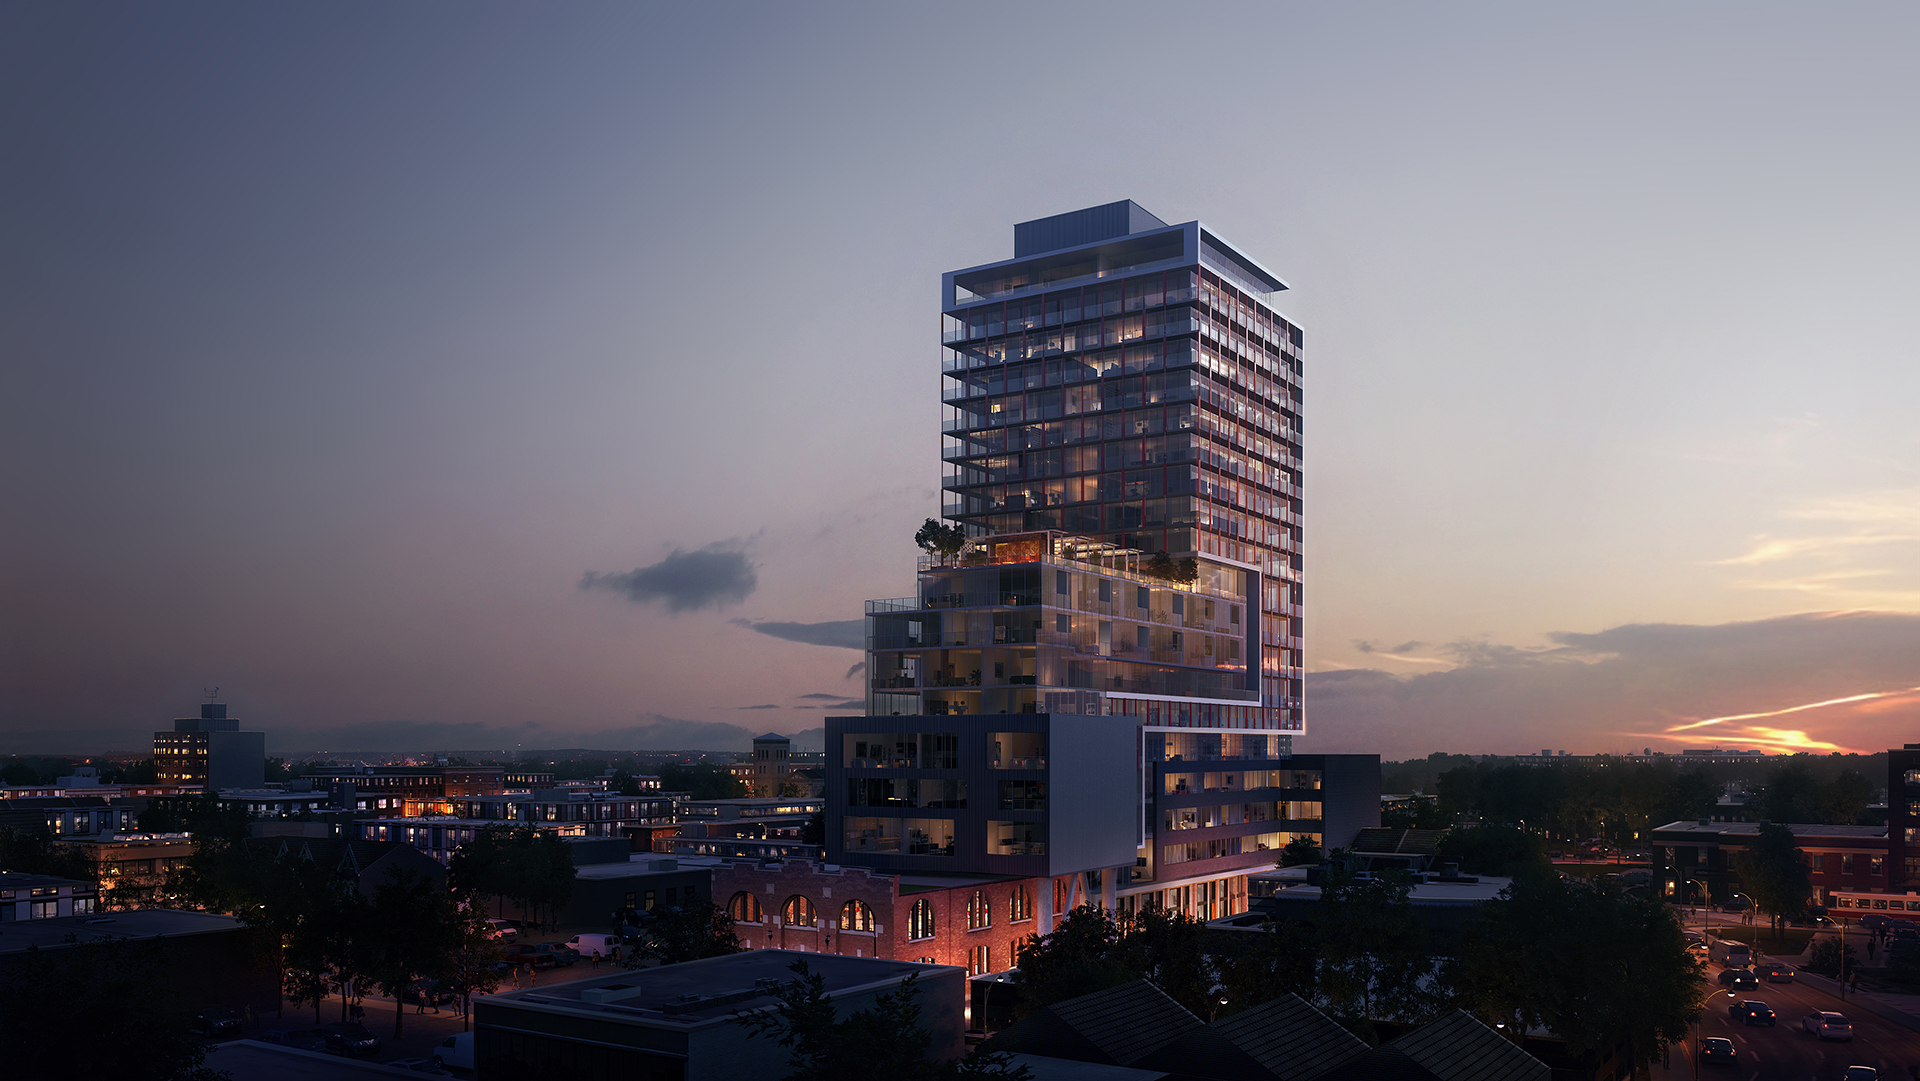 East United Condos rendering of building exterior and surrounding area at night.